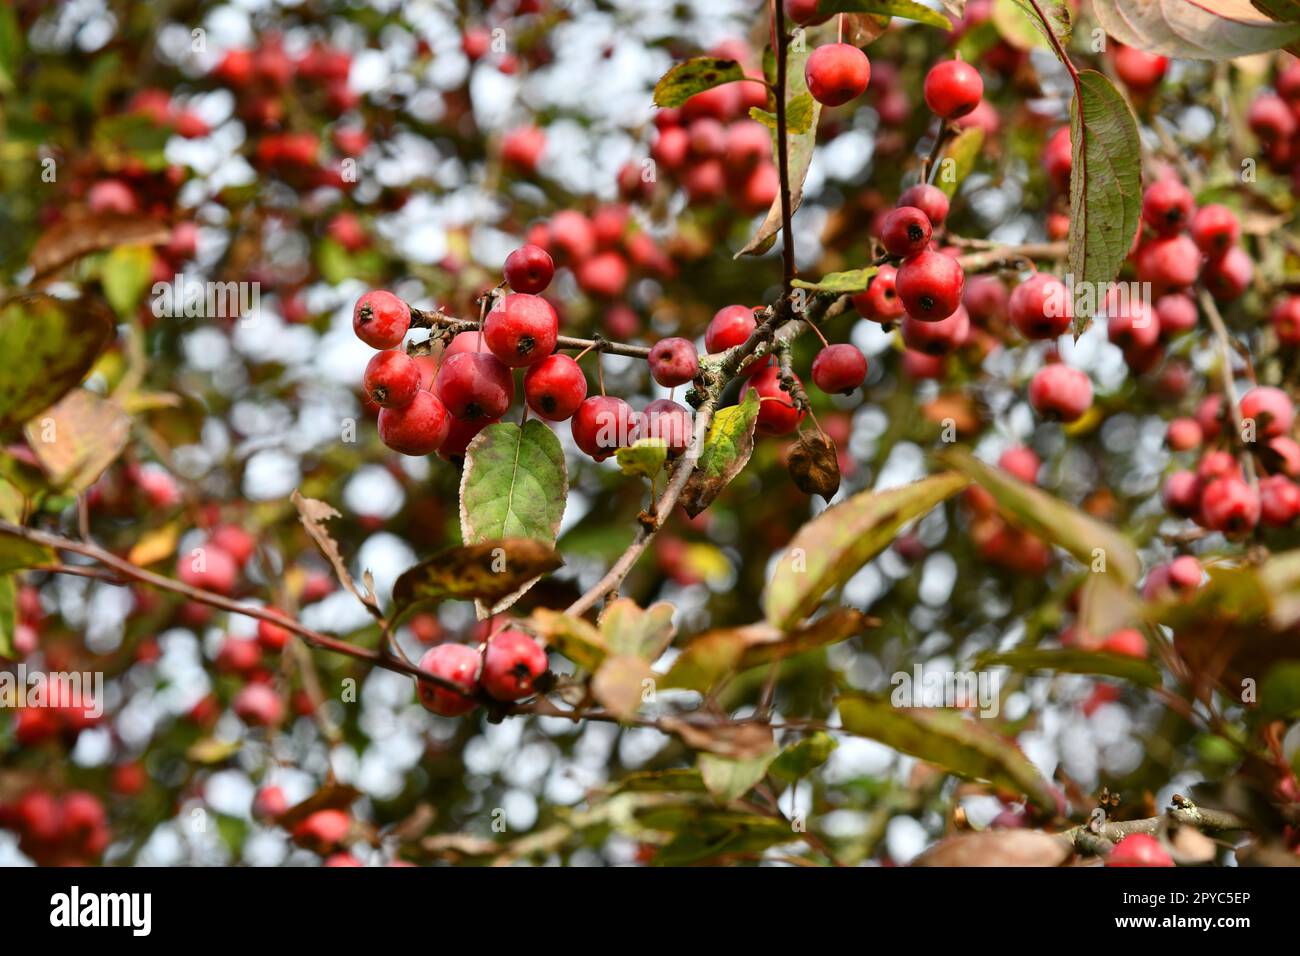 https://c8.alamy.com/comp/2PYC5EP/cherry-apple-with-red-fruits-malus-baccata-2PYC5EP.jpg